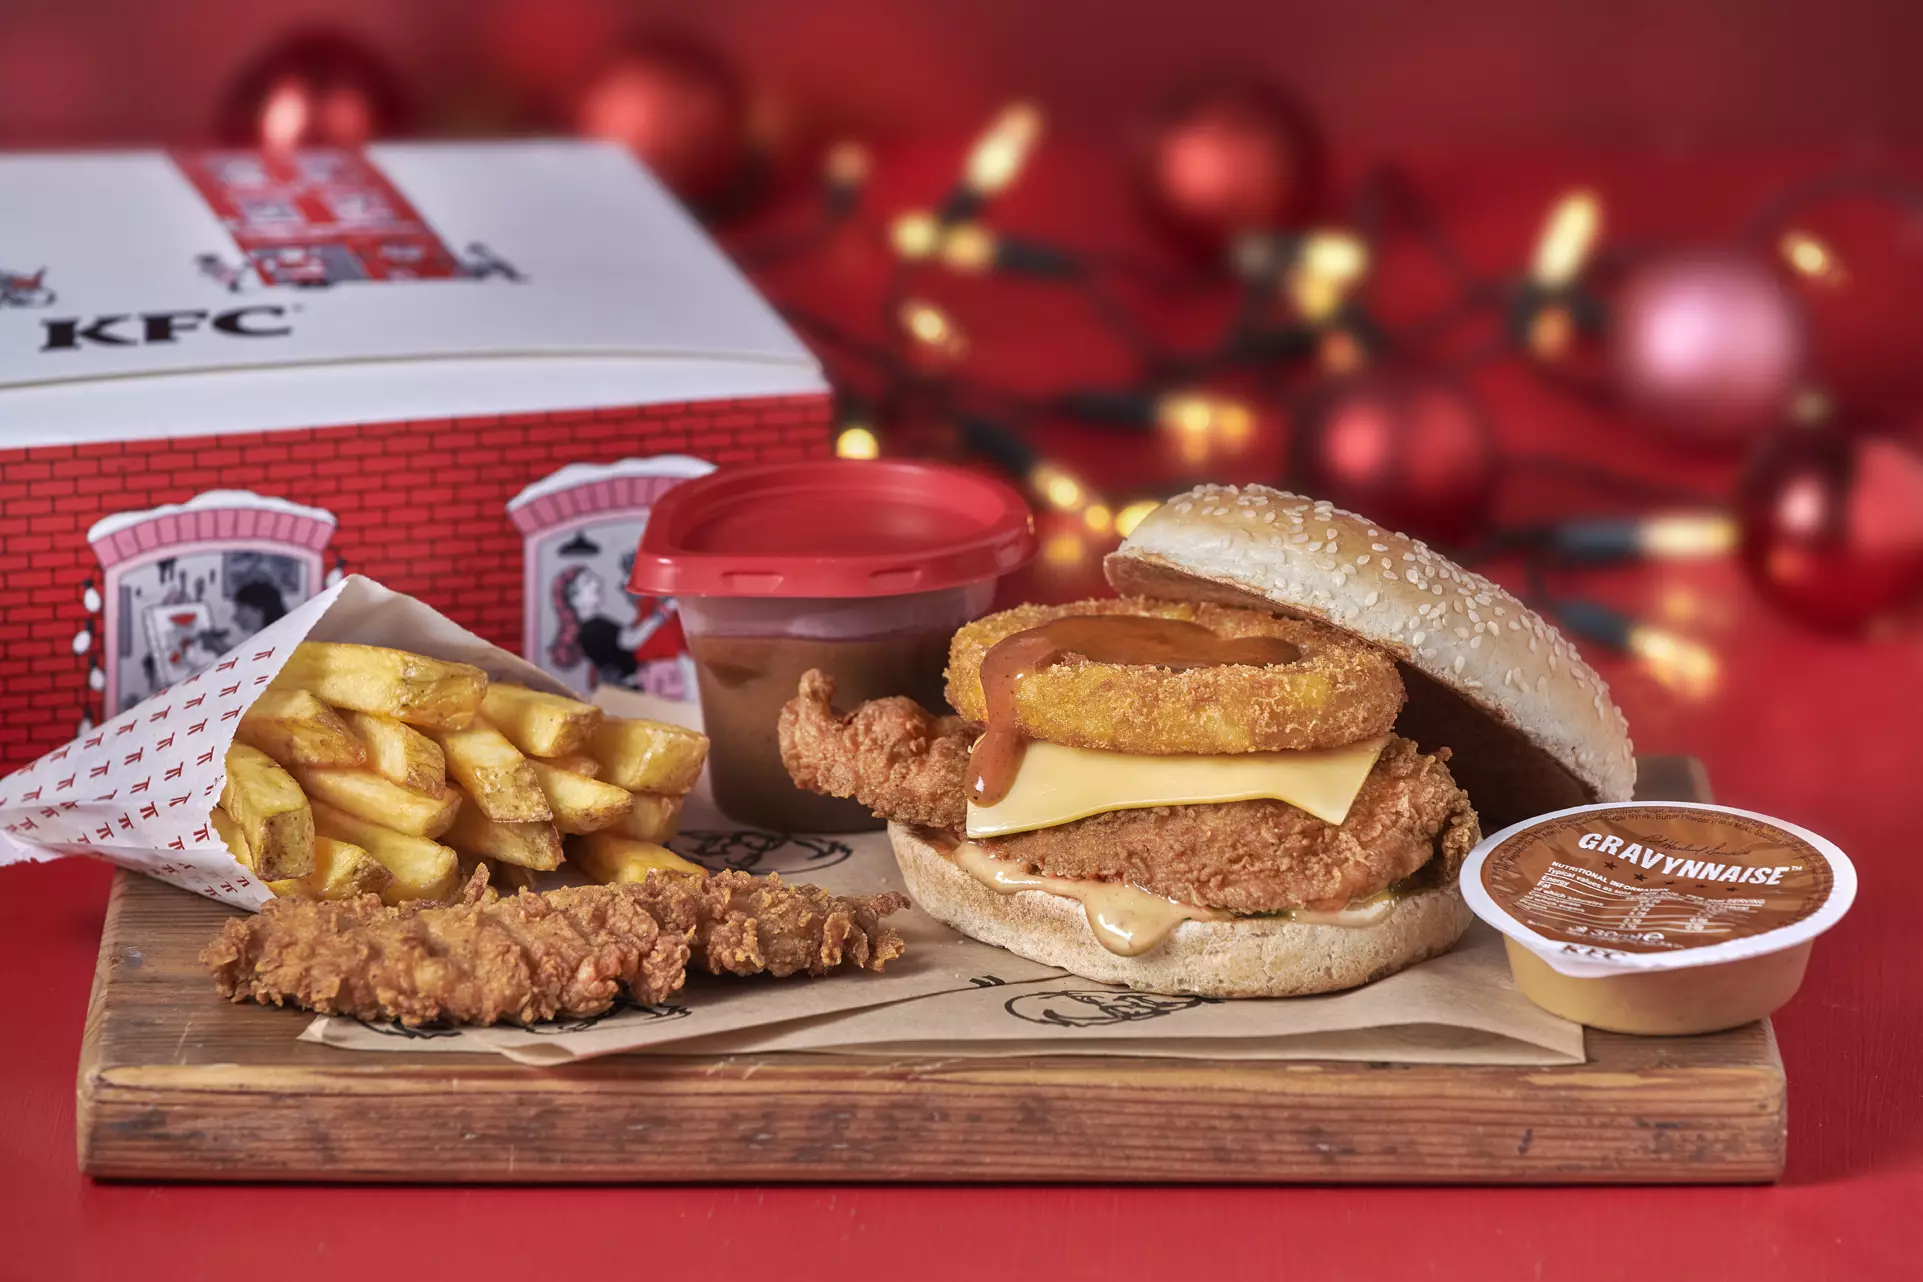 The Gravy Burger Box meal is priced from £6.99.